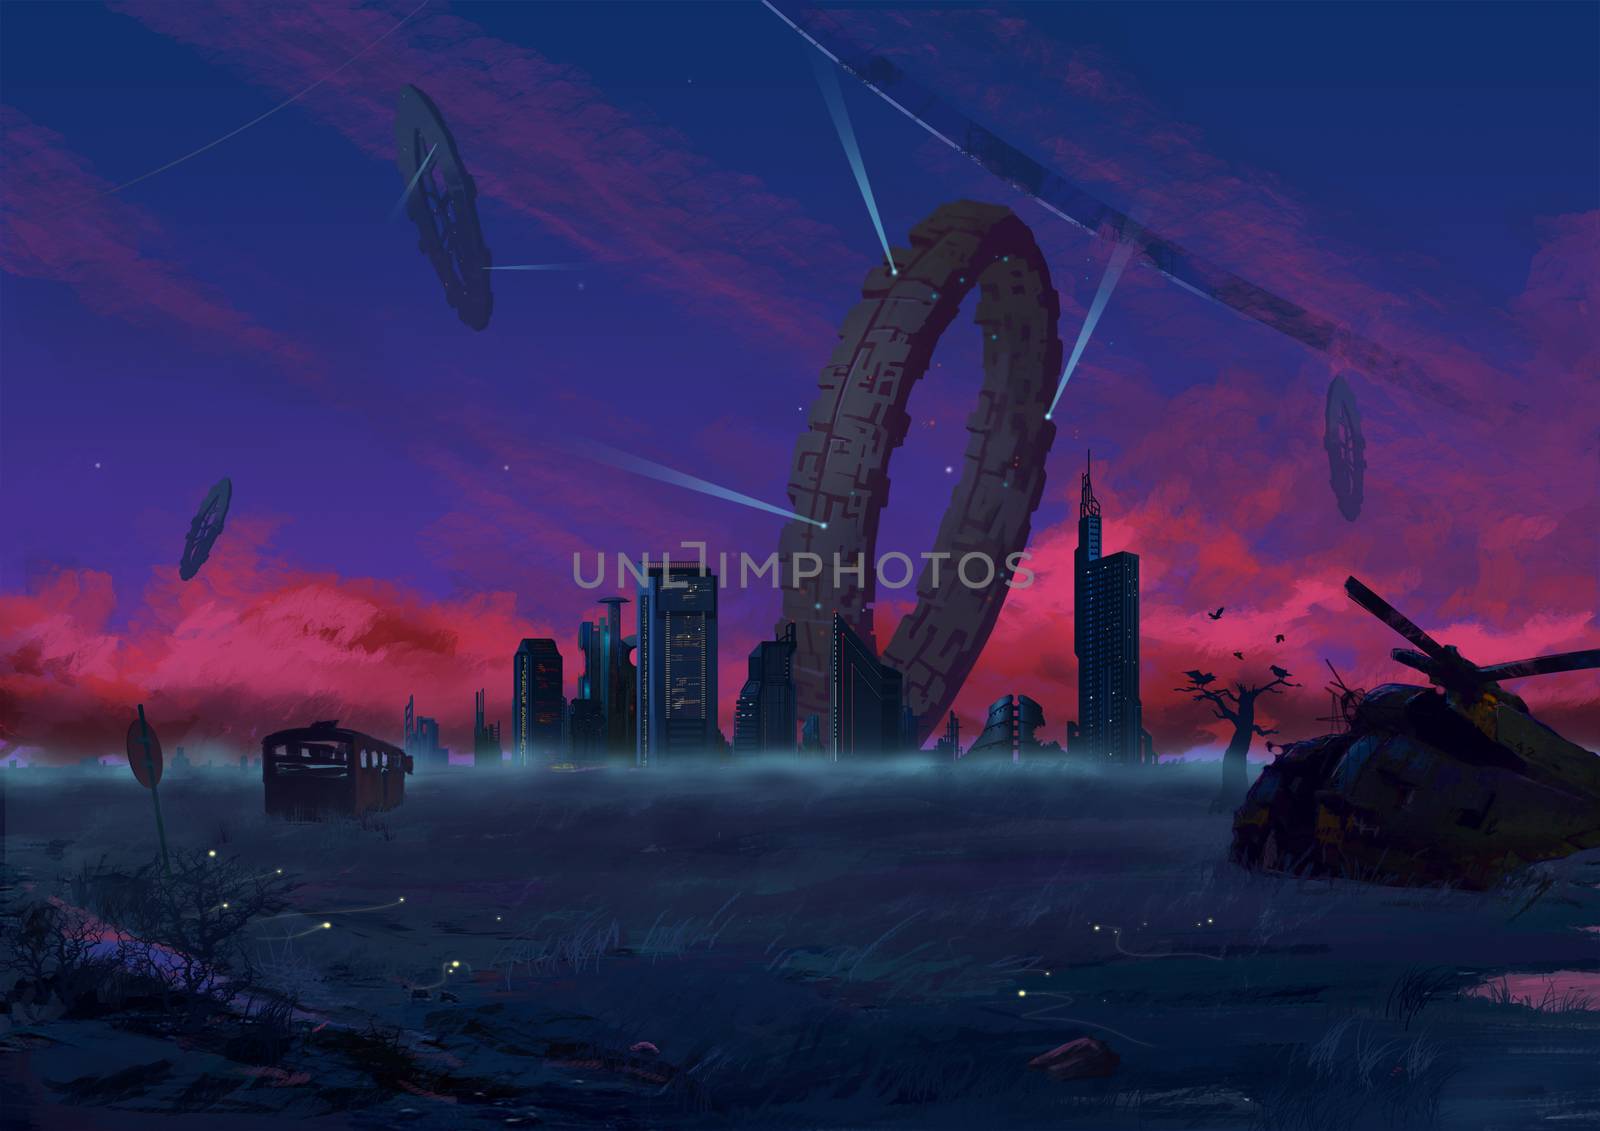 Illustration: Can you believe your city was occupied by Alien Circles after you went for a walk? What will you feel about that? Realistic Cartoon Style. Sci-Fi Scene / Wallpaper / Background Design.